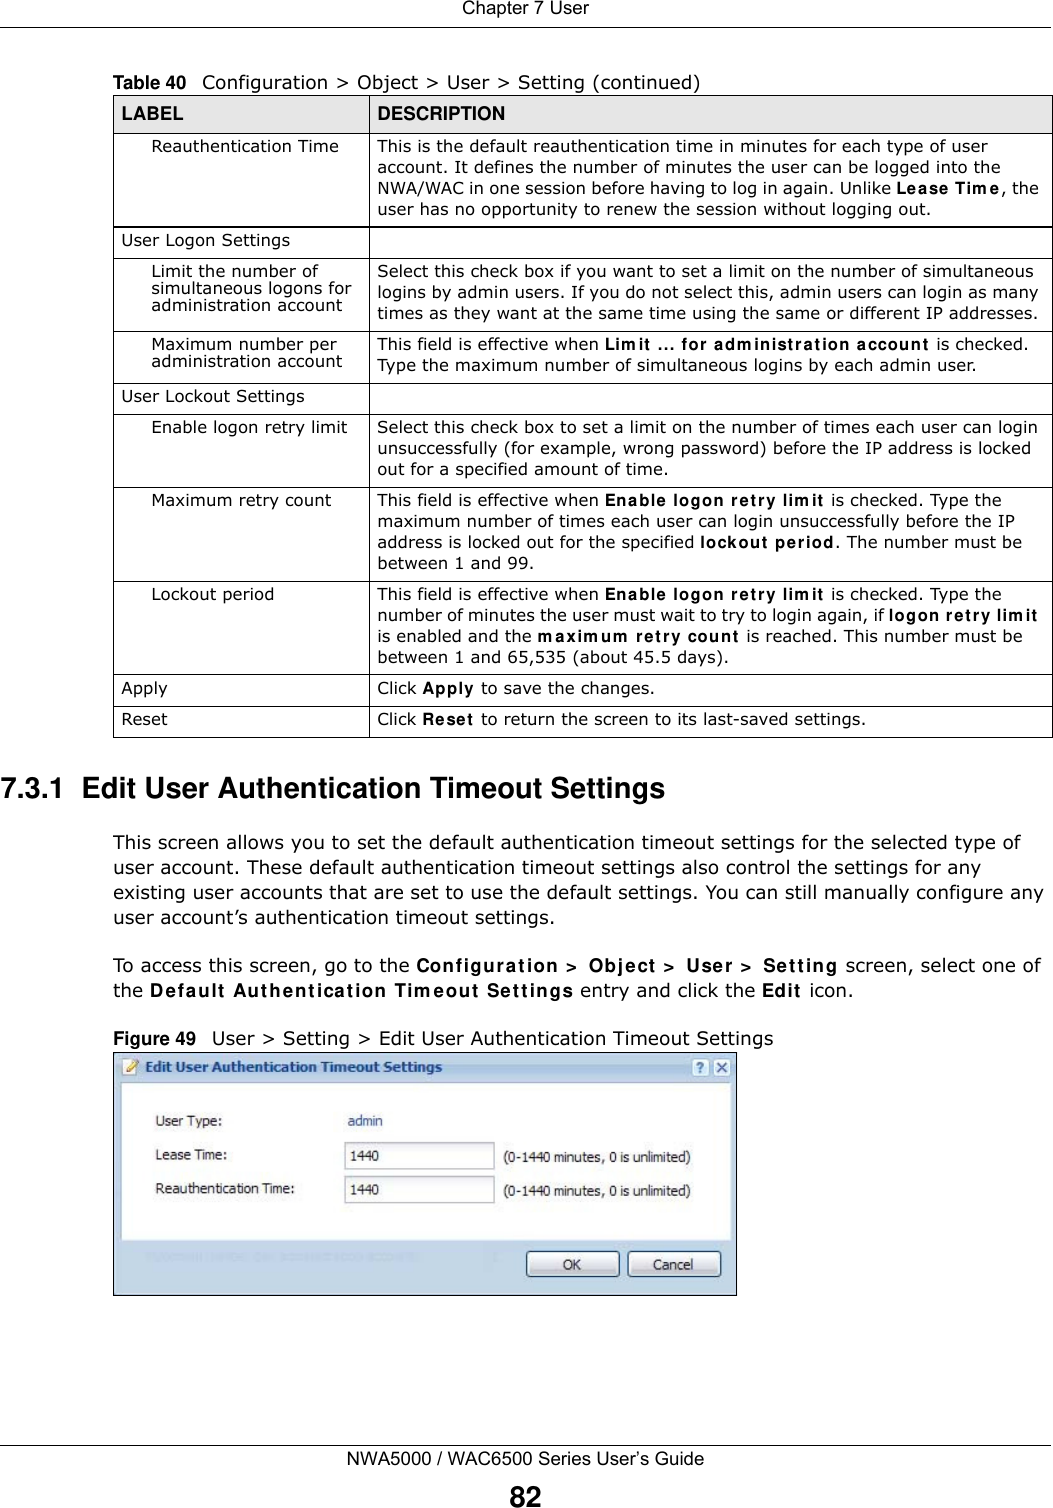 Chapter 7 UserNWA5000 / WAC6500 Series User’s Guide827.3.1  Edit User Authentication Timeout SettingsThis screen allows you to set the default authentication timeout settings for the selected type of user account. These default authentication timeout settings also control the settings for any existing user accounts that are set to use the default settings. You can still manually configure any user account’s authentication timeout settings.To access this screen, go to the Configur at ion &gt;  Obj ect  &gt;  User &gt;  Sett ing screen, select one of the De fault  Authe nt ica tion Tim eout  Se t tings entry and click the Edit icon.Figure 49   User &gt; Setting &gt; Edit User Authentication Timeout SettingsReauthentication Time This is the default reauthentication time in minutes for each type of user account. It defines the number of minutes the user can be logged into the NWA/WAC in one session before having to log in again. Unlike Le a se  Tim e, the user has no opportunity to renew the session without logging out.User Logon SettingsLimit the number of simultaneous logons for administration accountSelect this check box if you want to set a limit on the number of simultaneous logins by admin users. If you do not select this, admin users can login as many times as they want at the same time using the same or different IP addresses.Maximum number per administration account This field is effective when Lim it  ... for  adm inist rat ion accoun t  is checked. Type the maximum number of simultaneous logins by each admin user. User Lockout SettingsEnable logon retry limit Select this check box to set a limit on the number of times each user can login unsuccessfully (for example, wrong password) before the IP address is locked out for a specified amount of time.Maximum retry count This field is effective when Ena ble  logon ret r y lim it is checked. Type the maximum number of times each user can login unsuccessfully before the IP address is locked out for the specified lock ou t  period. The number must be between 1 and 99.Lockout period This field is effective when Enable logon  retry lim it  is checked. Type the number of minutes the user must wait to try to login again, if logon  retry lim it  is enabled and the m a xim um  retry cou n t  is reached. This number must be between 1 and 65,535 (about 45.5 days).Apply Click Apply to save the changes. Reset Click Re se t  to return the screen to its last-saved settings. Table 40   Configuration &gt; Object &gt; User &gt; Setting (continued)LABEL DESCRIPTION